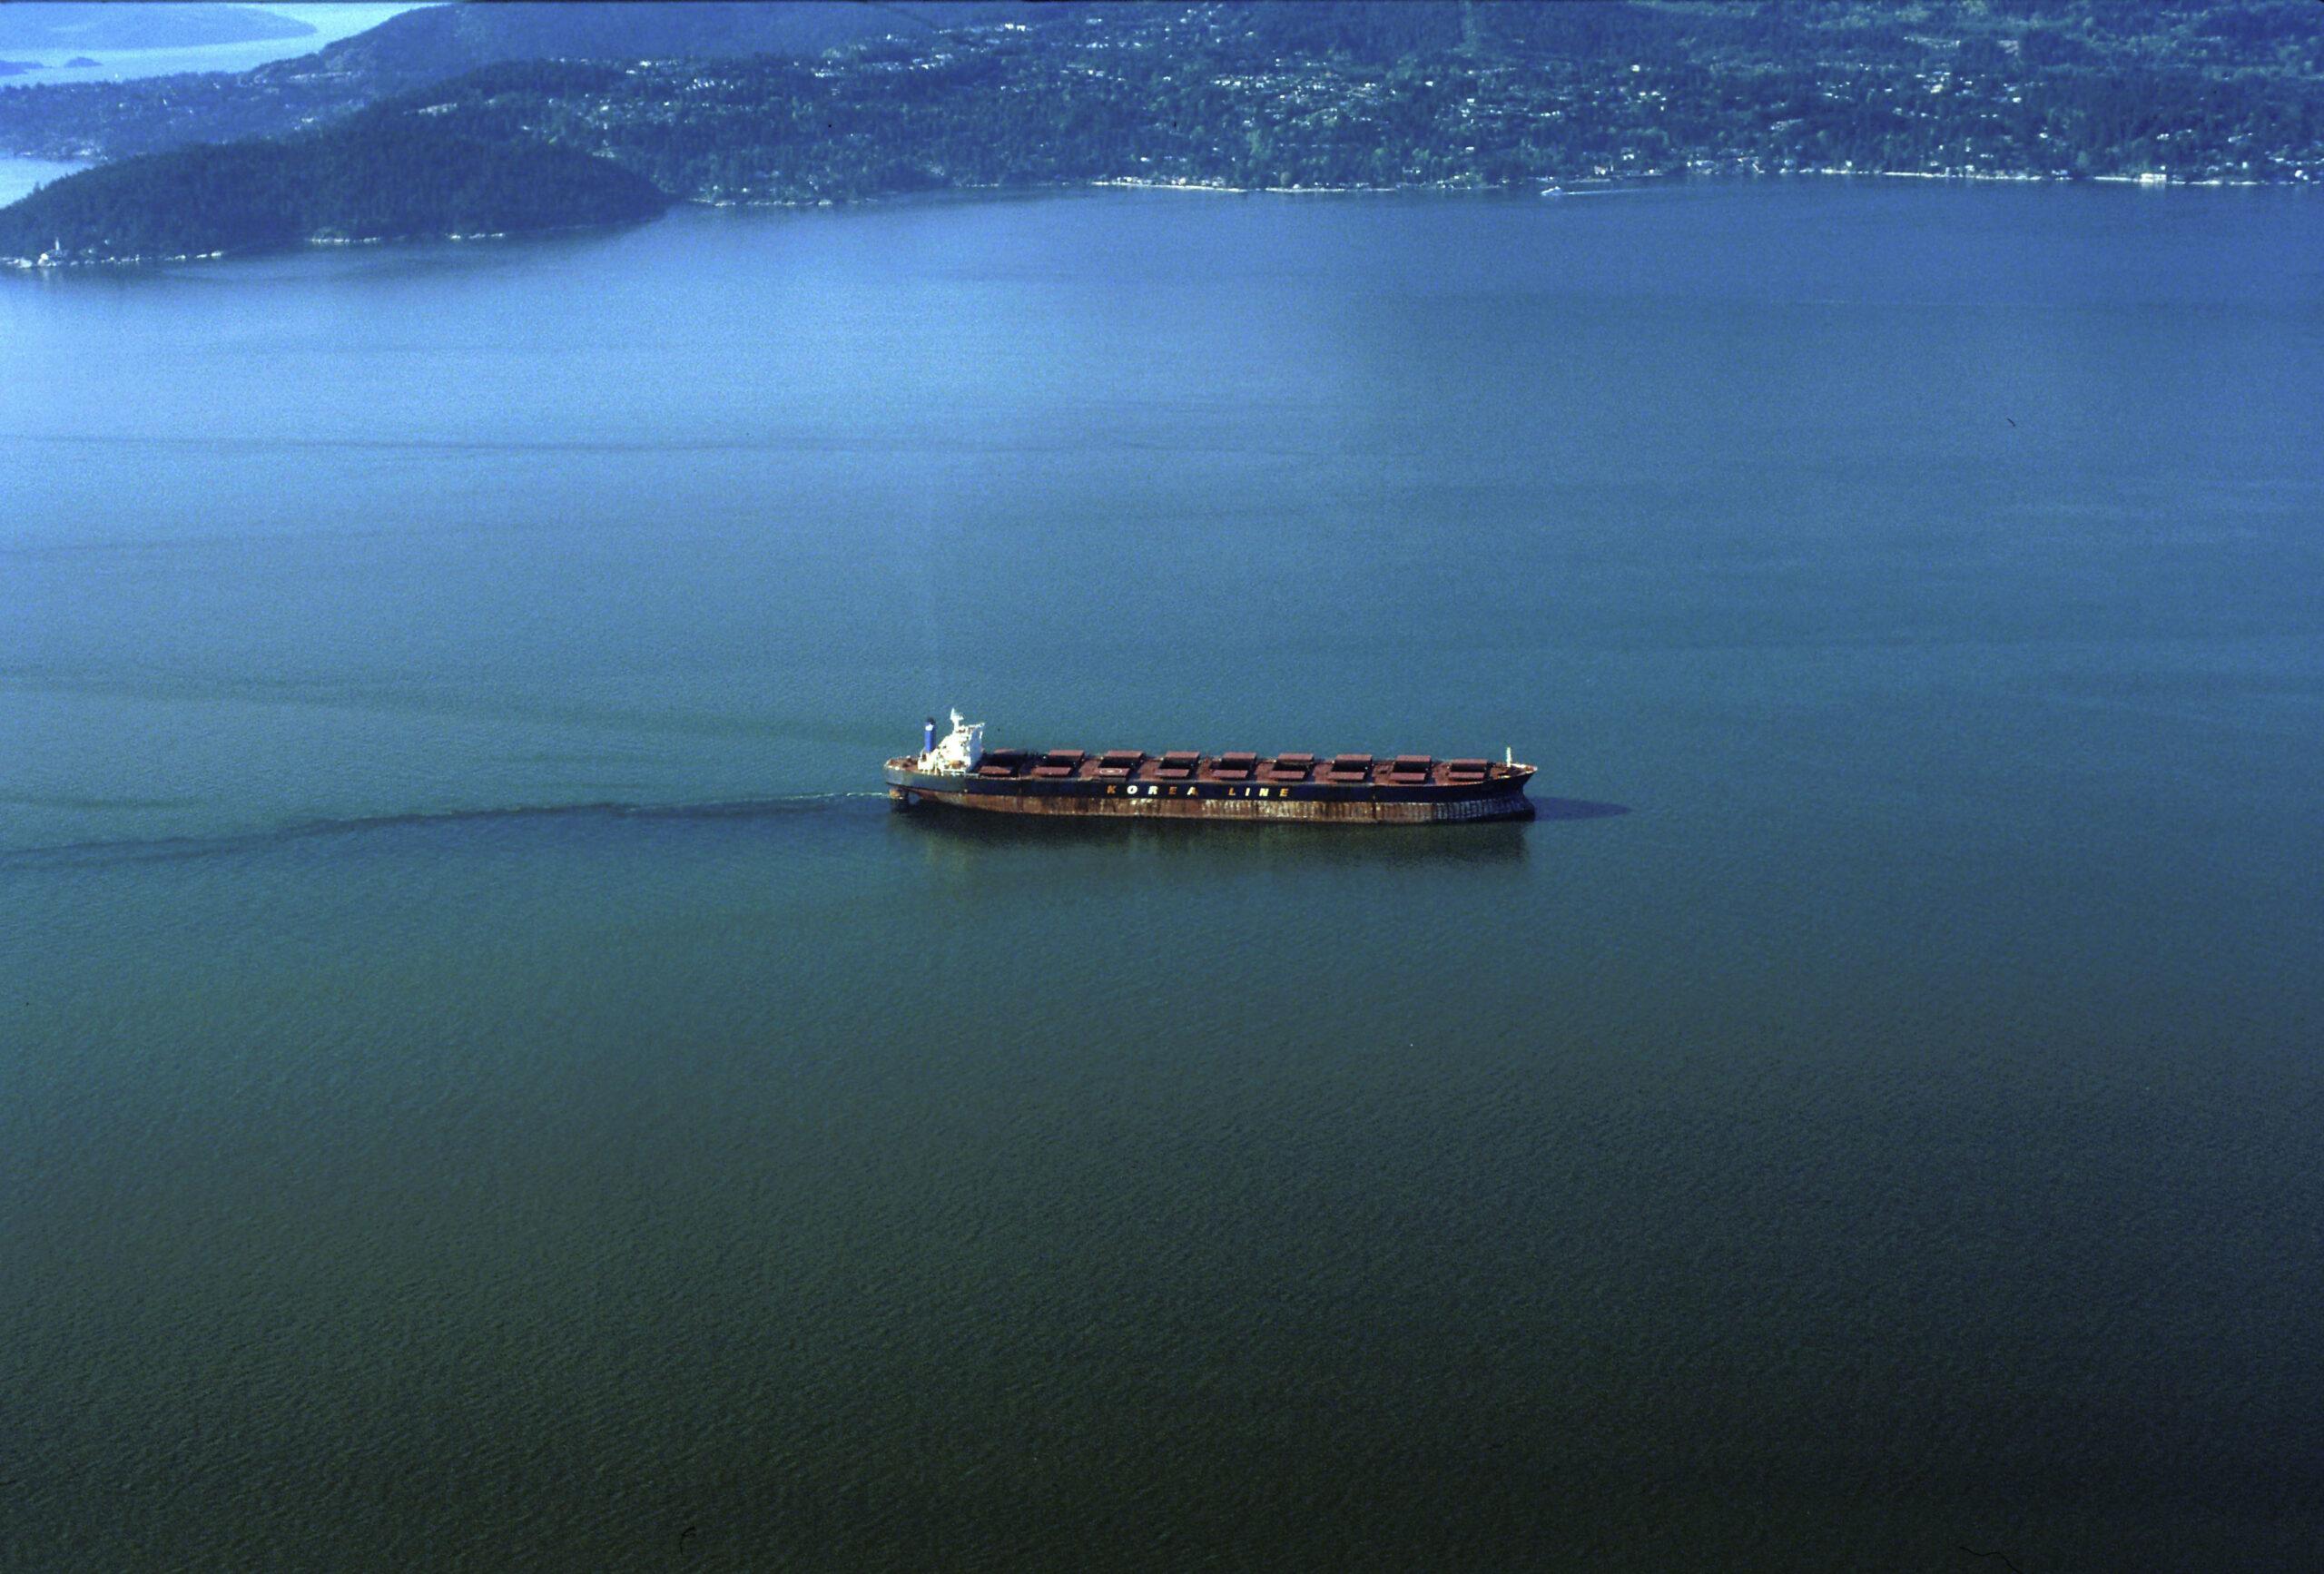 Freight ship dumping its bilge near Vancouver harbour, oil slick showing in the ship's wake